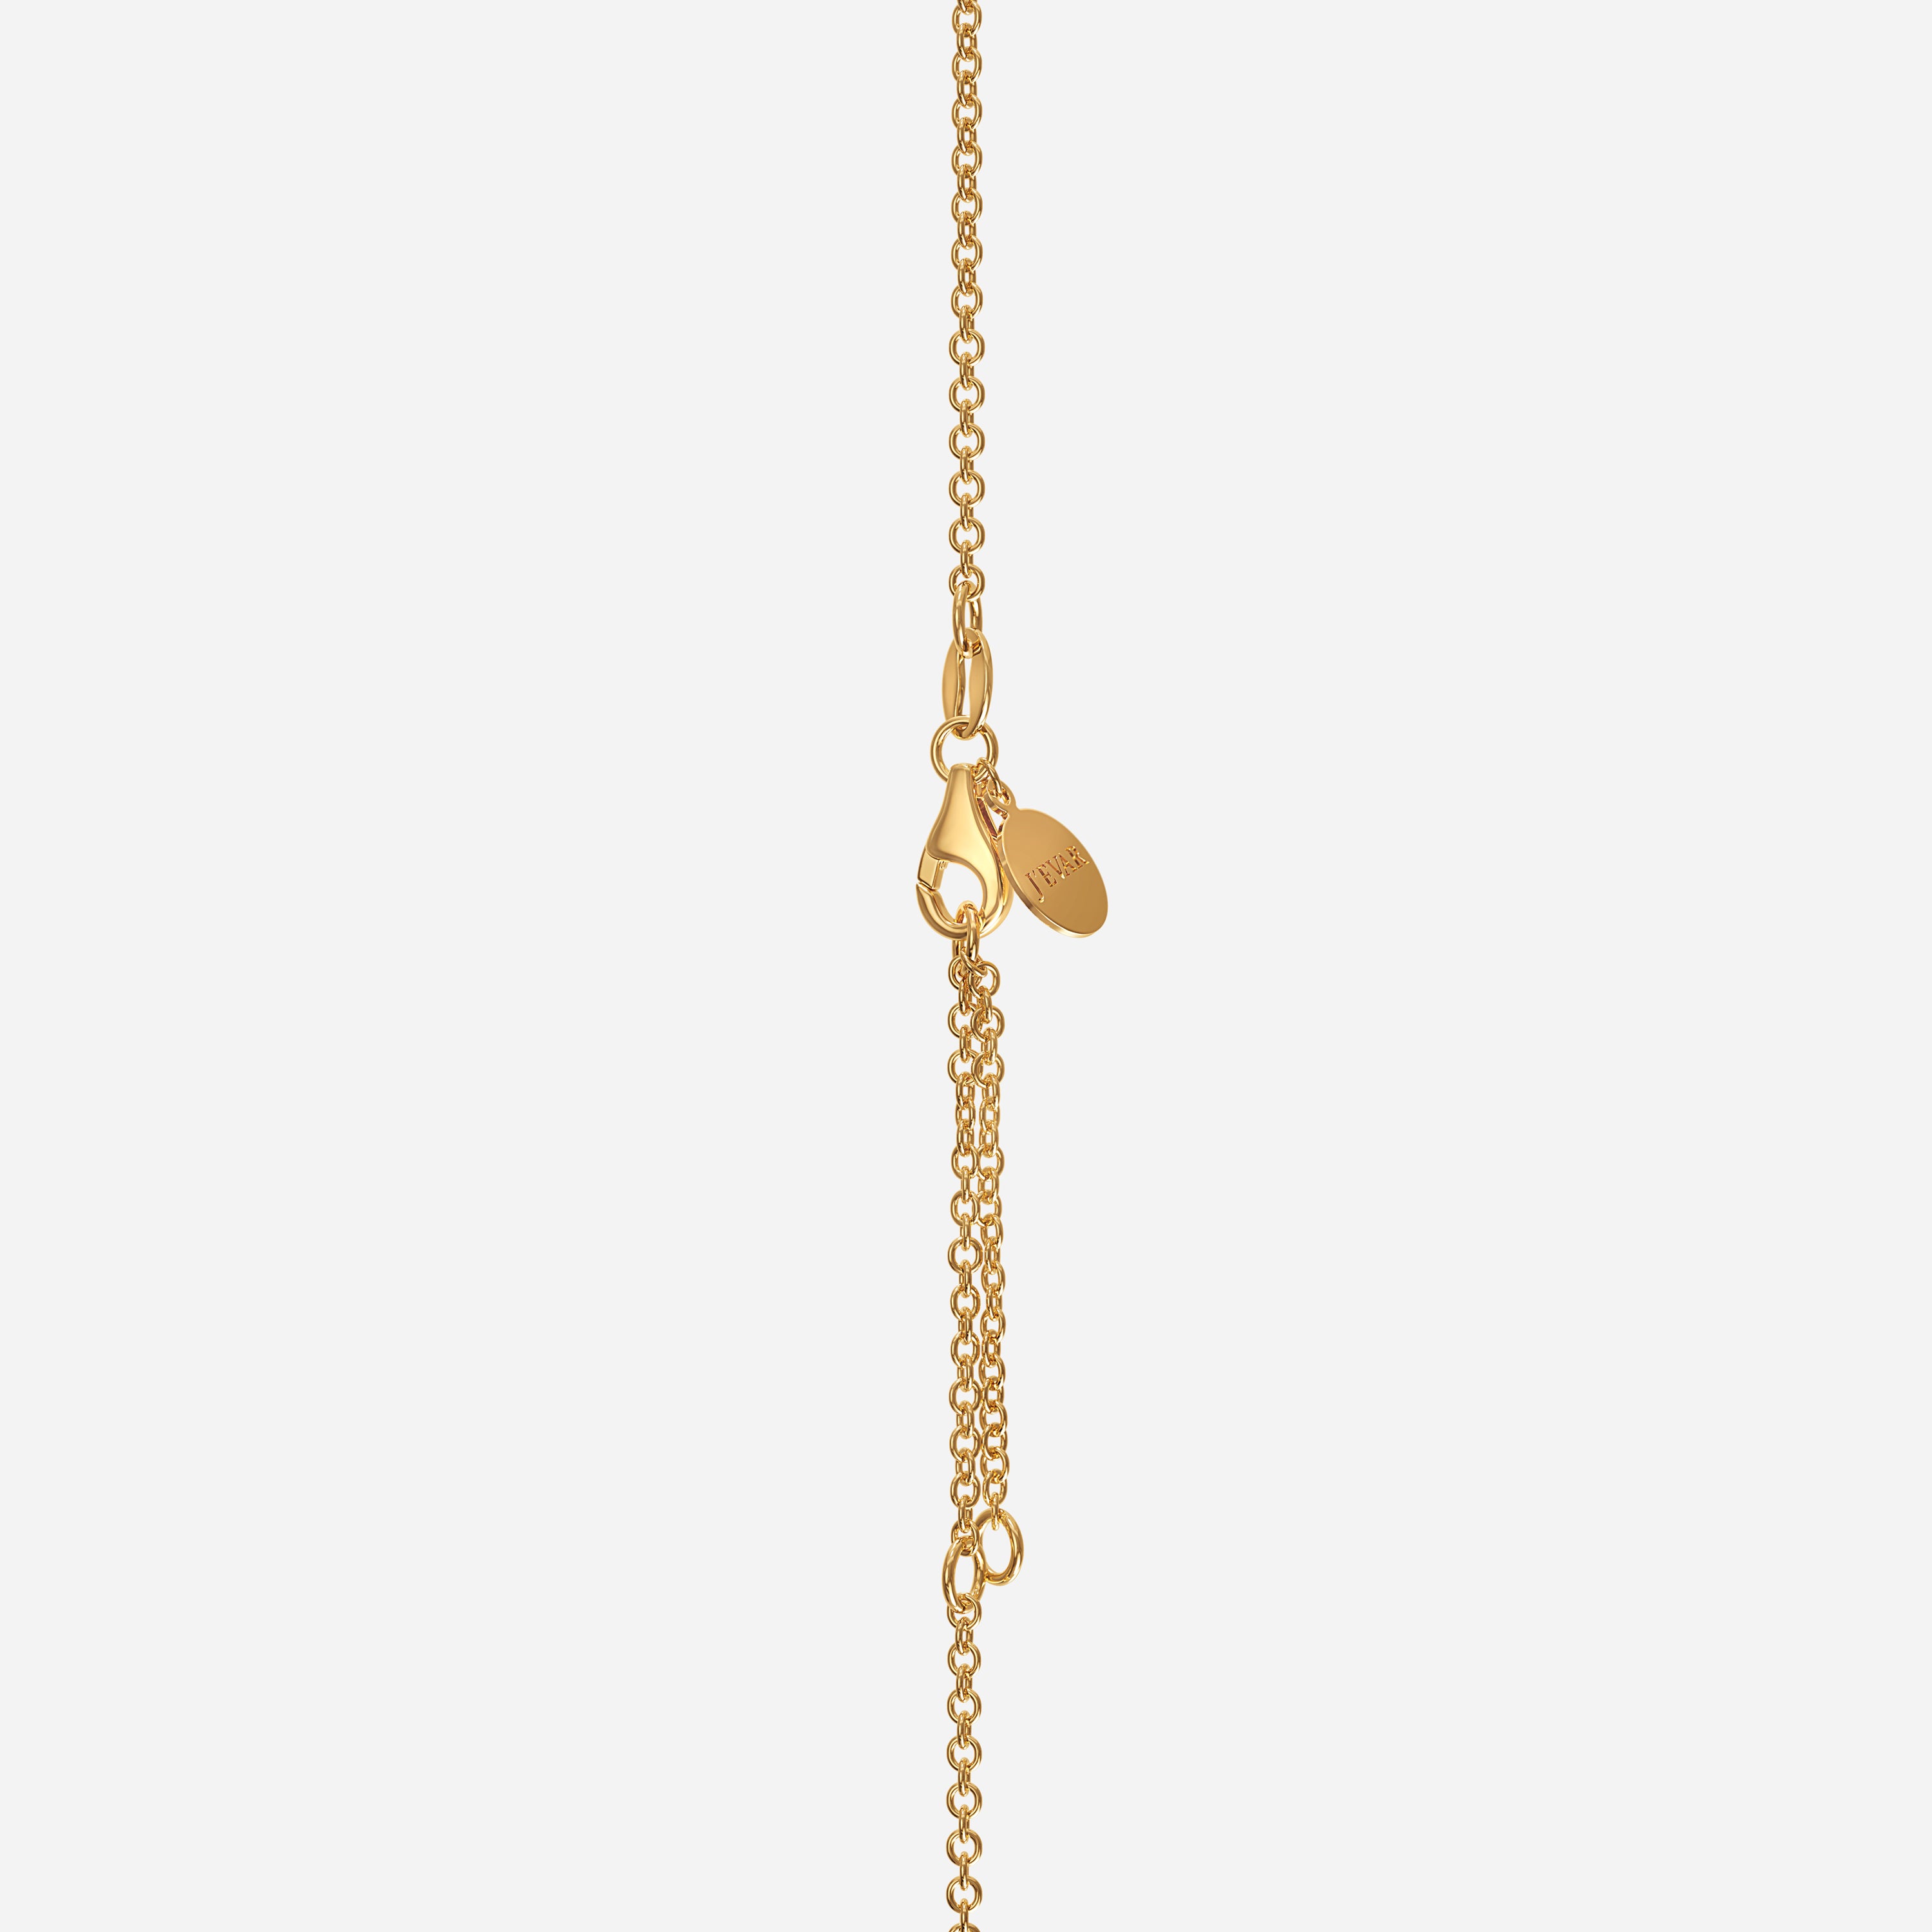 Browse our 14kt, 18kt and 40kt yellow gold jewelry - j'evar